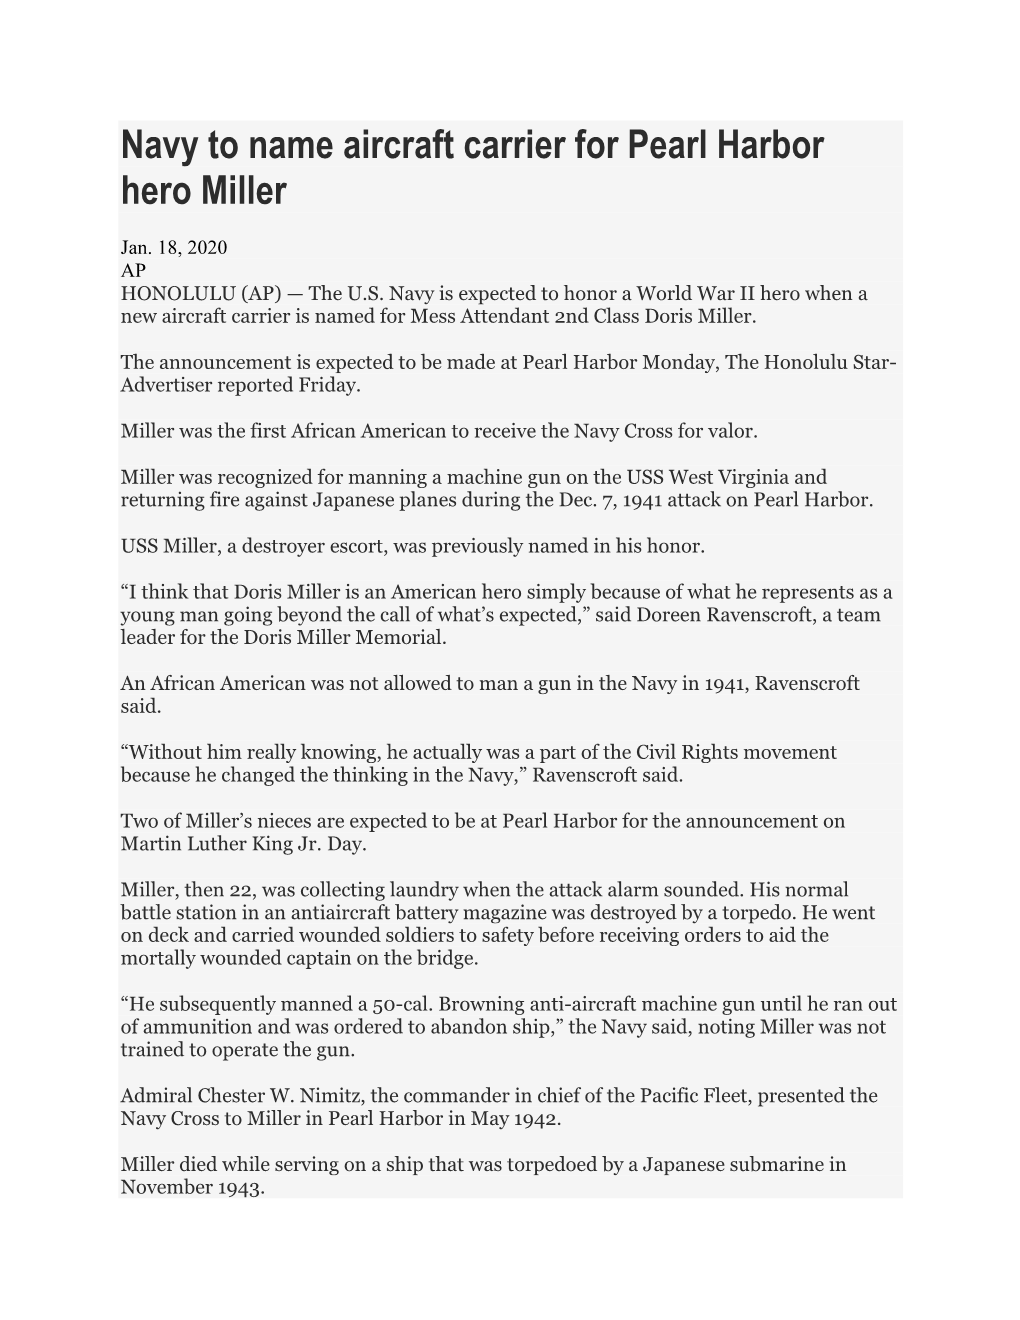 Navy to Name Aircraft Carrier for Pearl Harbor Hero Miller